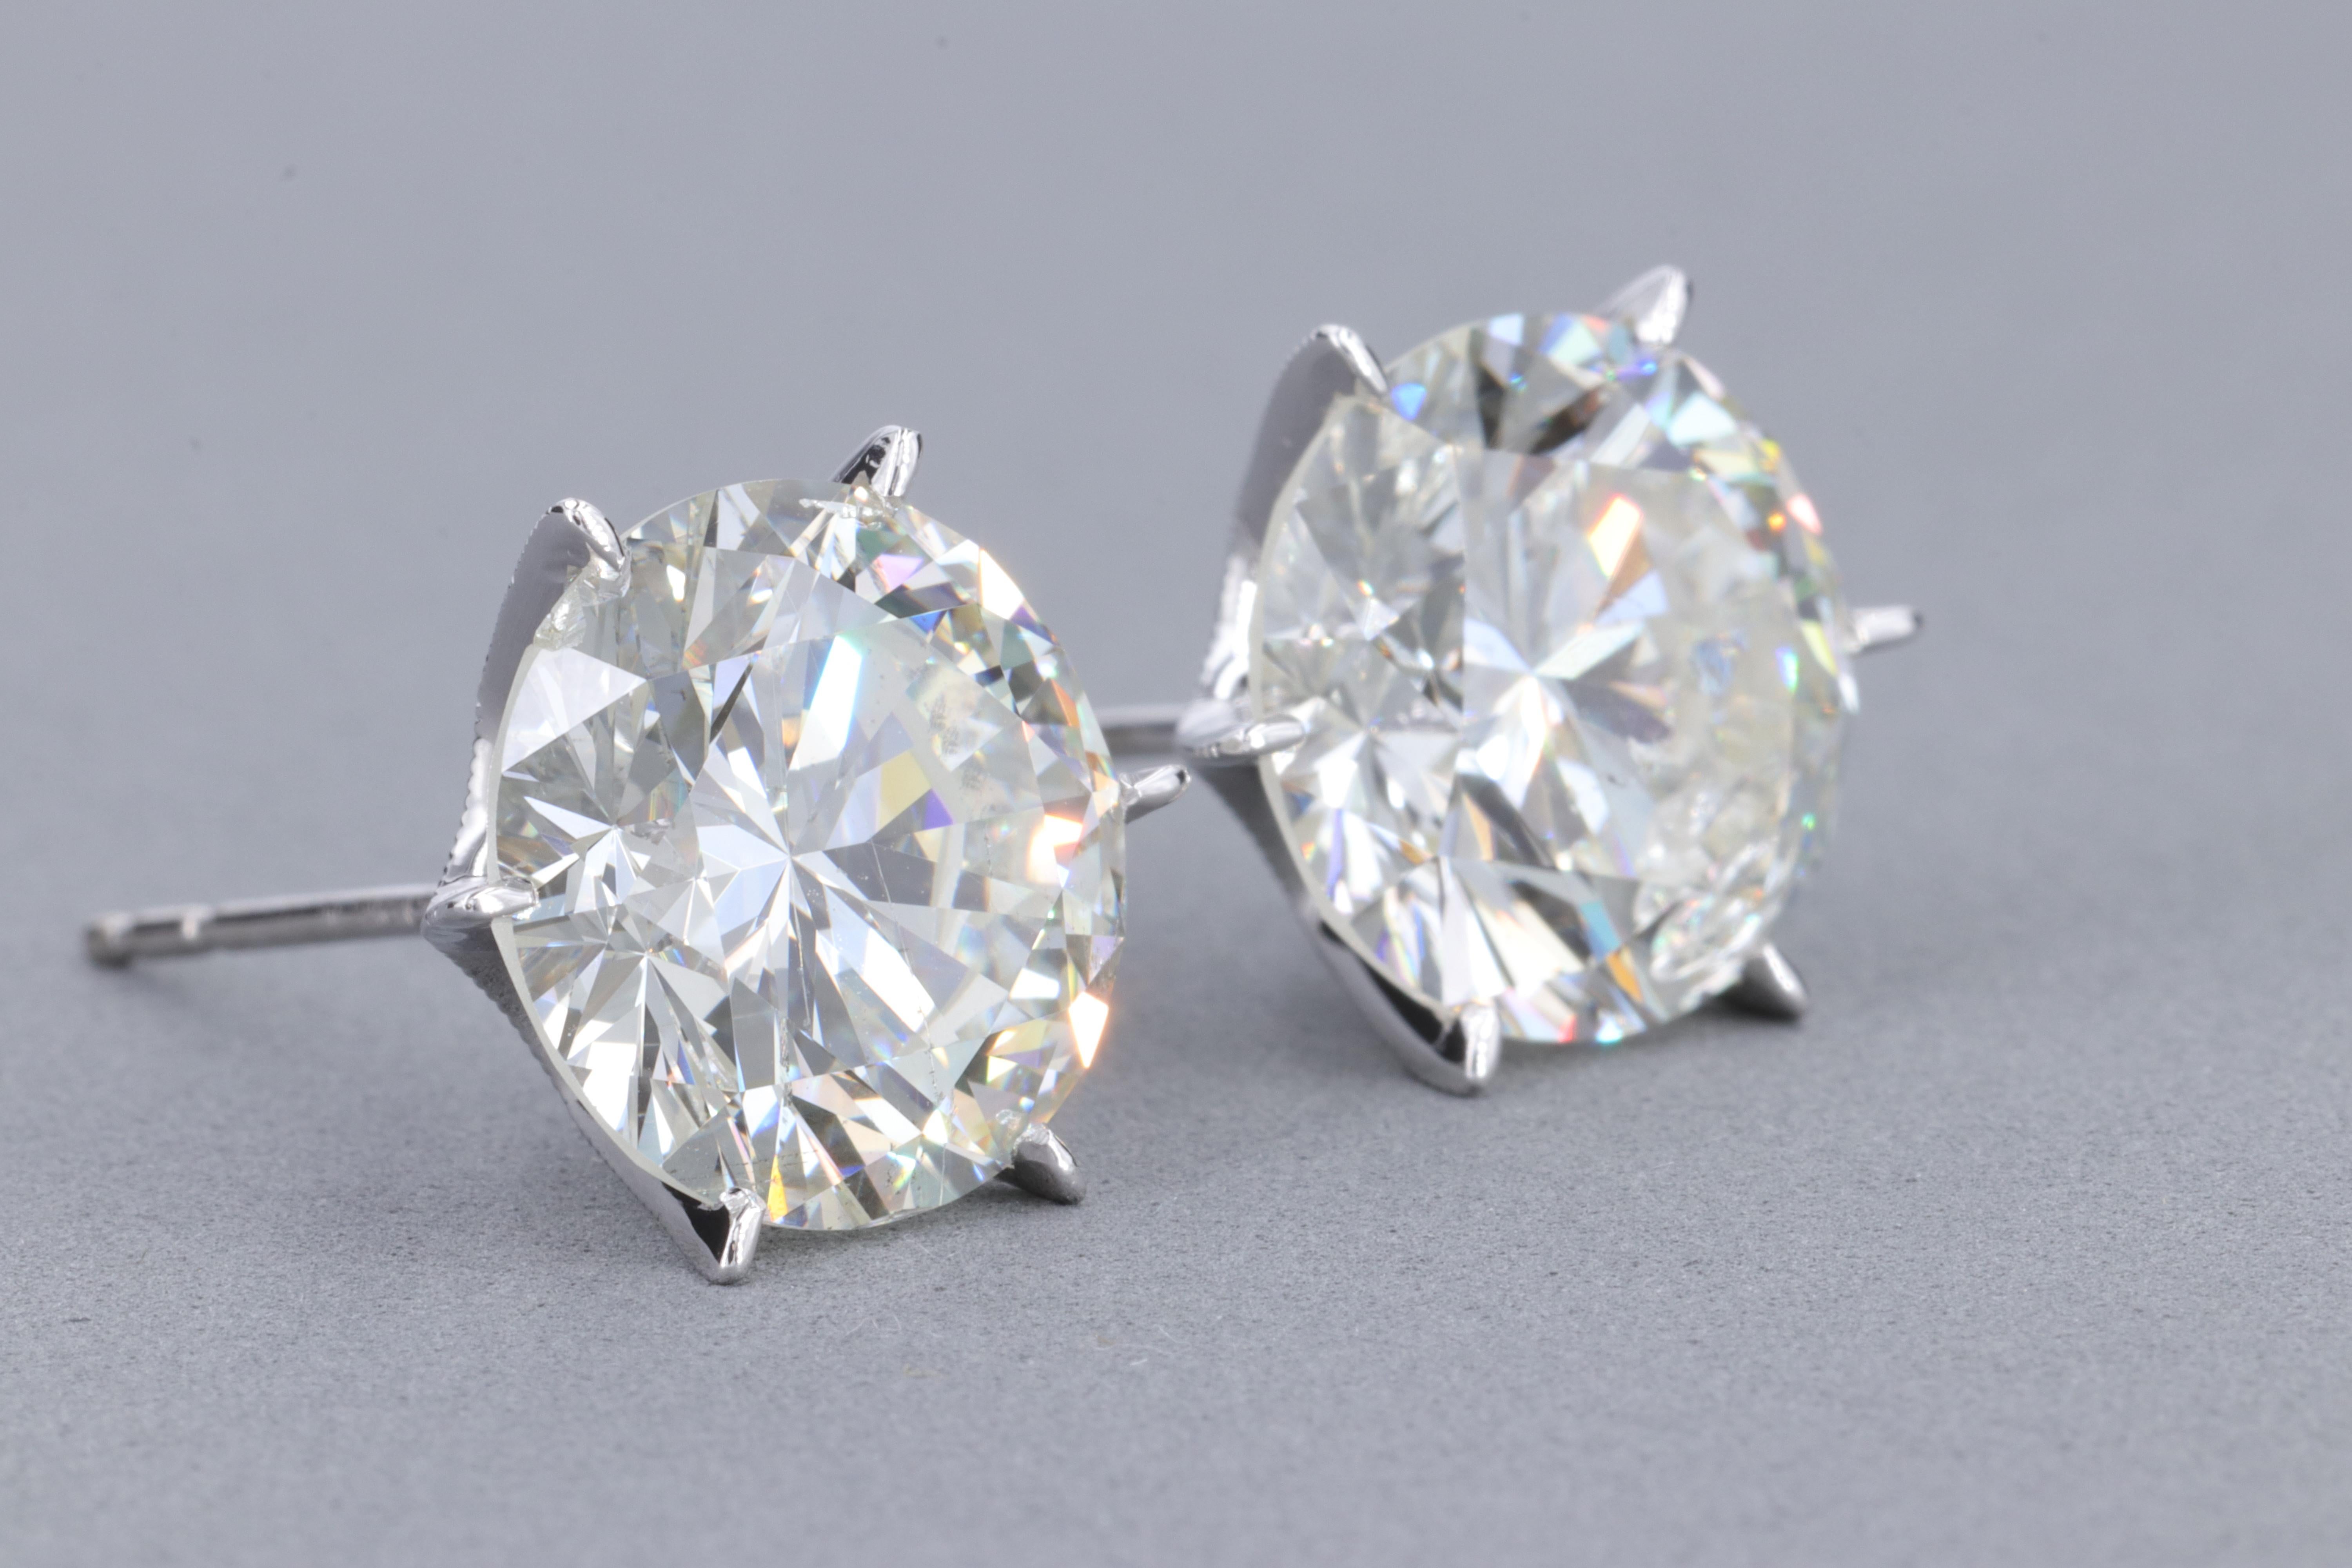 10.16 Carat Natural Diamond Stud Earrings in 18 Karat White Gold

This large set of diamond stud earrings features a

5.07 Carat K Color I1 Clarity GIA Round Brilliant Cut Natural Diamond

and a

5.09 Carat J Color I1 Clarity Round Brilliant Cut